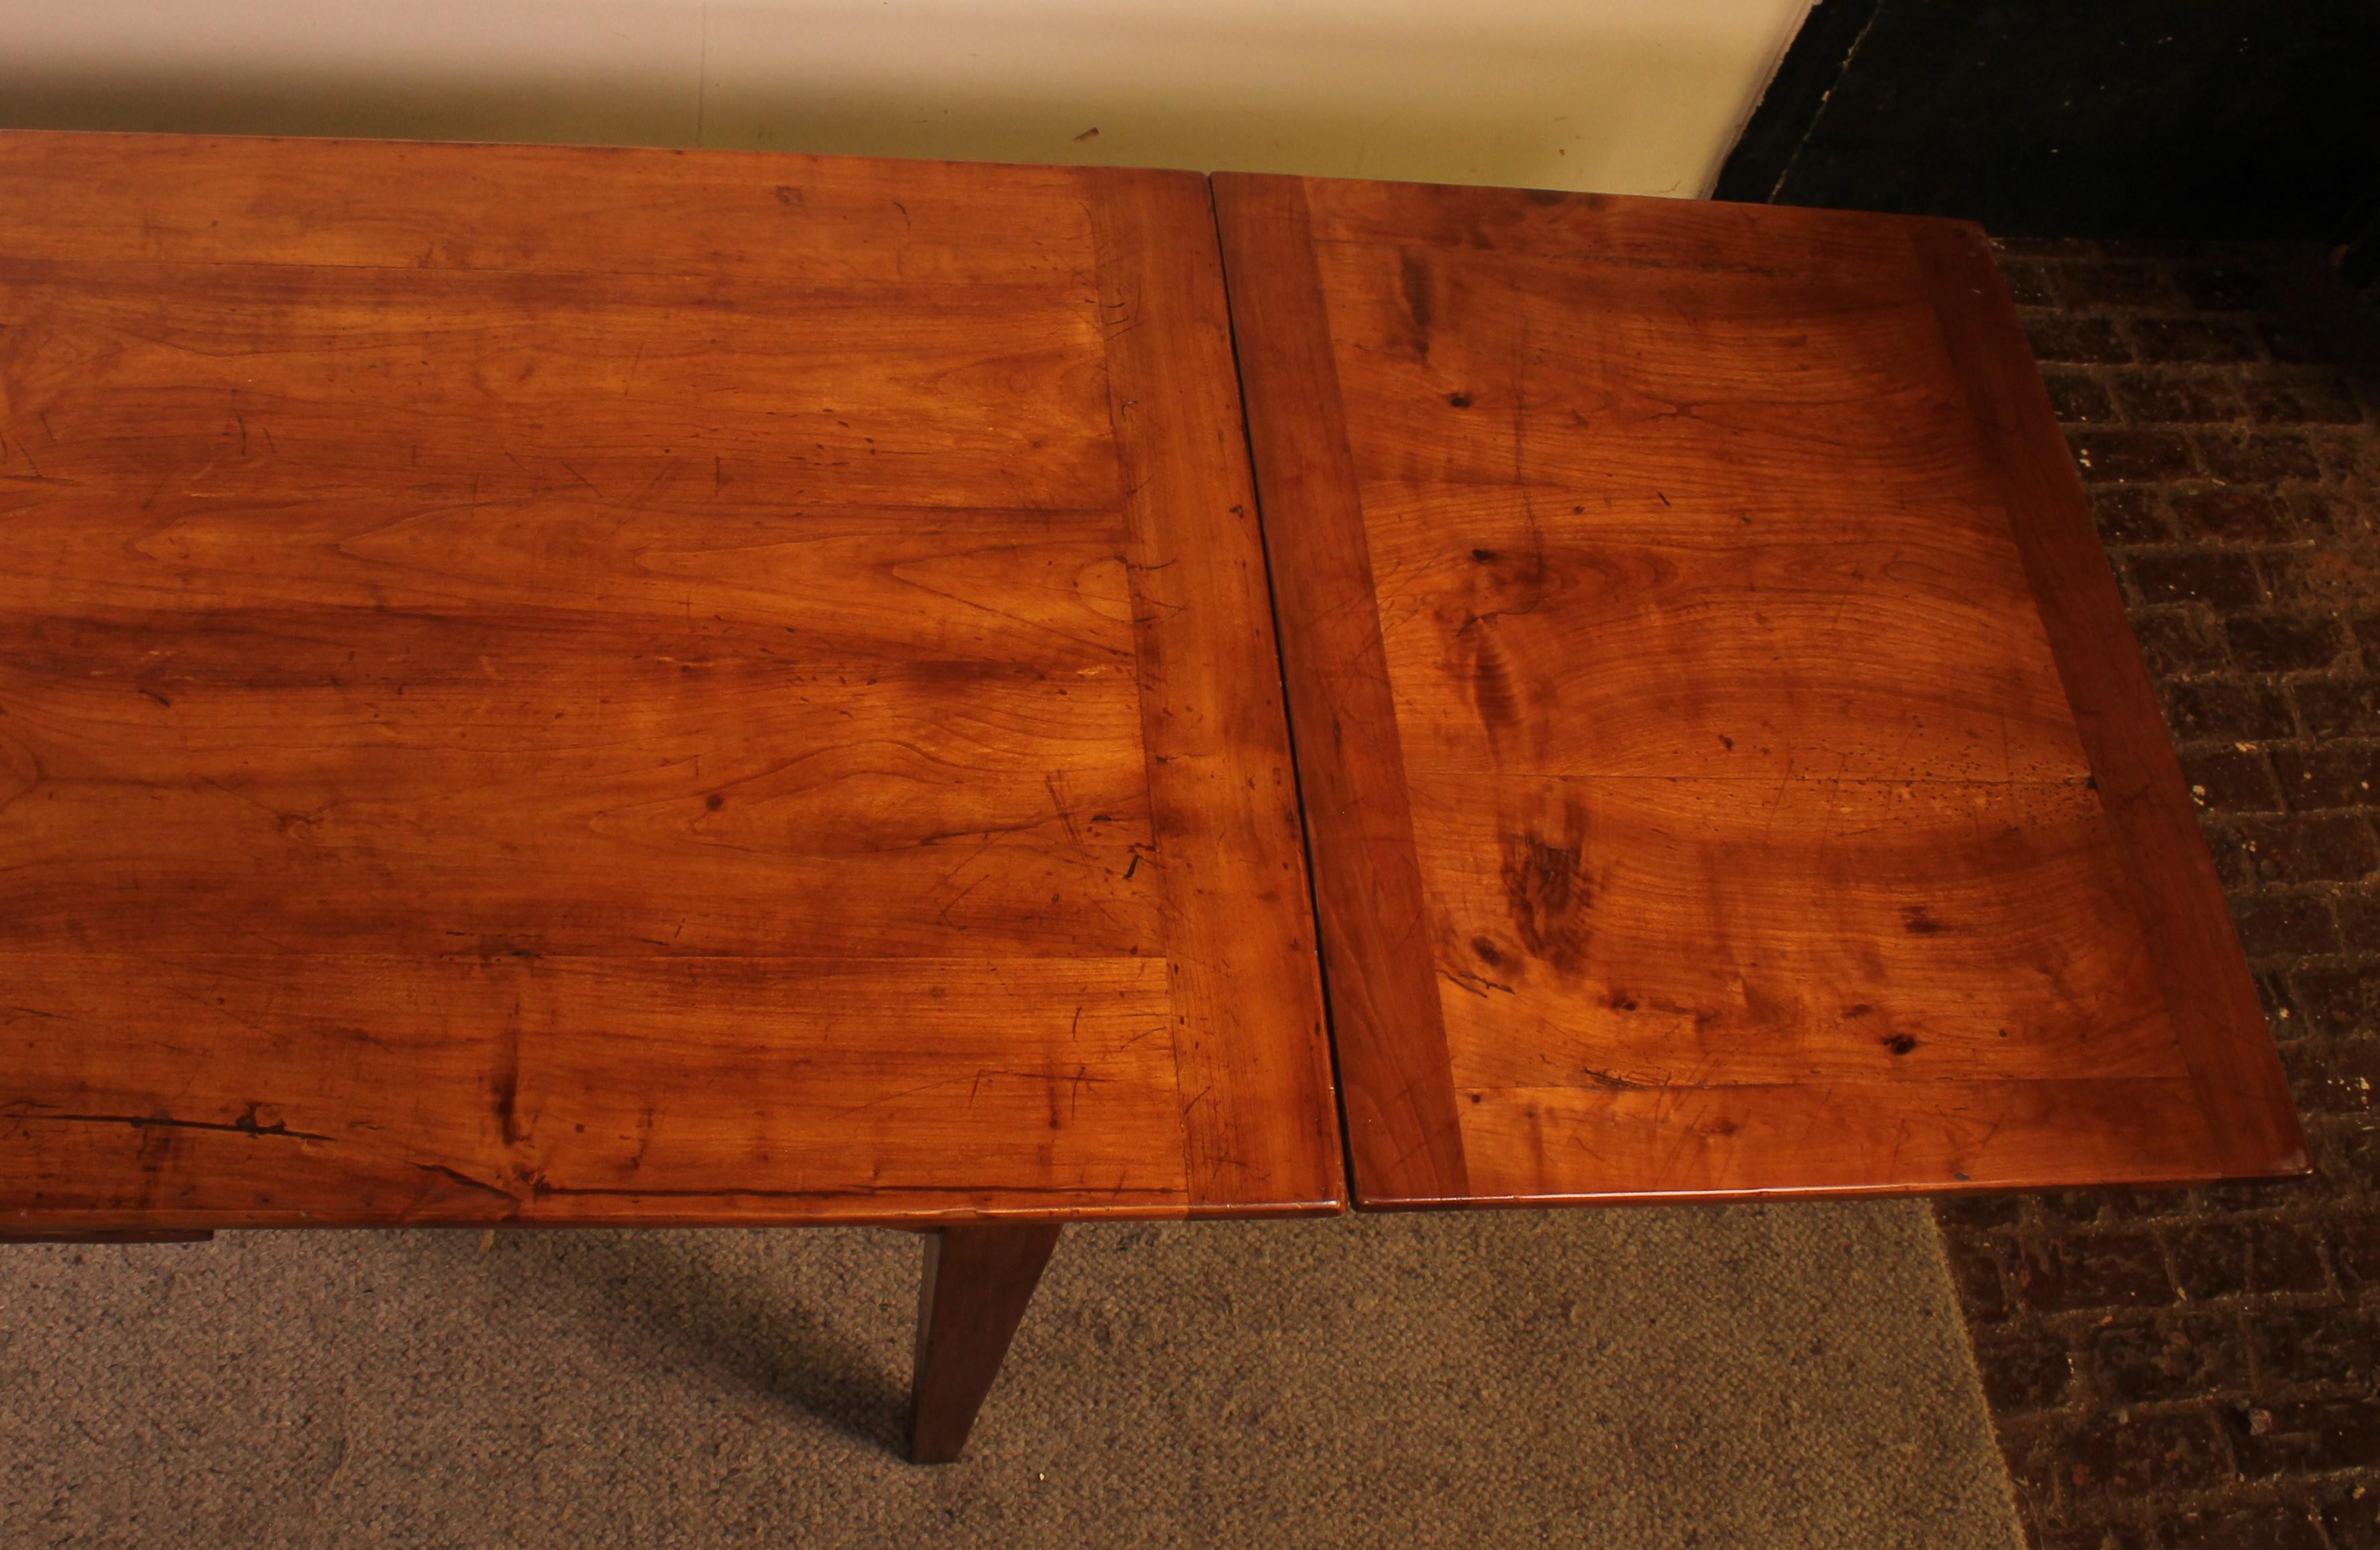 Small Extendable Table in Cherry Wood from the 19th Century For Sale 3